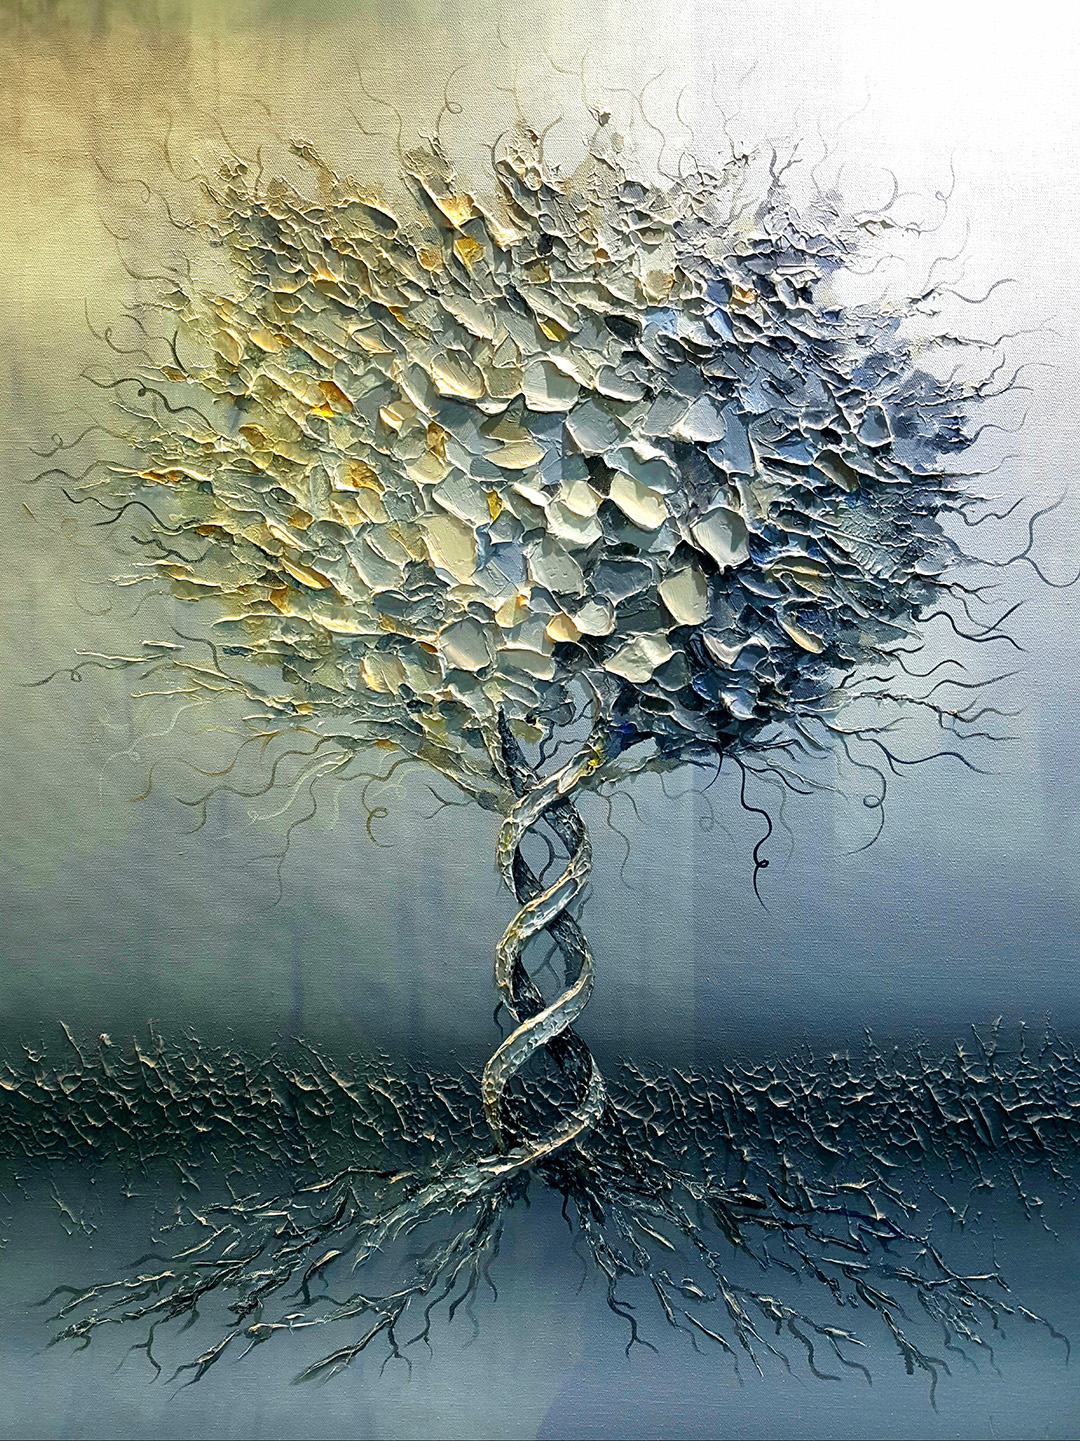 "The Tree of Life" Oil on Canvas, 40x30in by Alexandru Darida